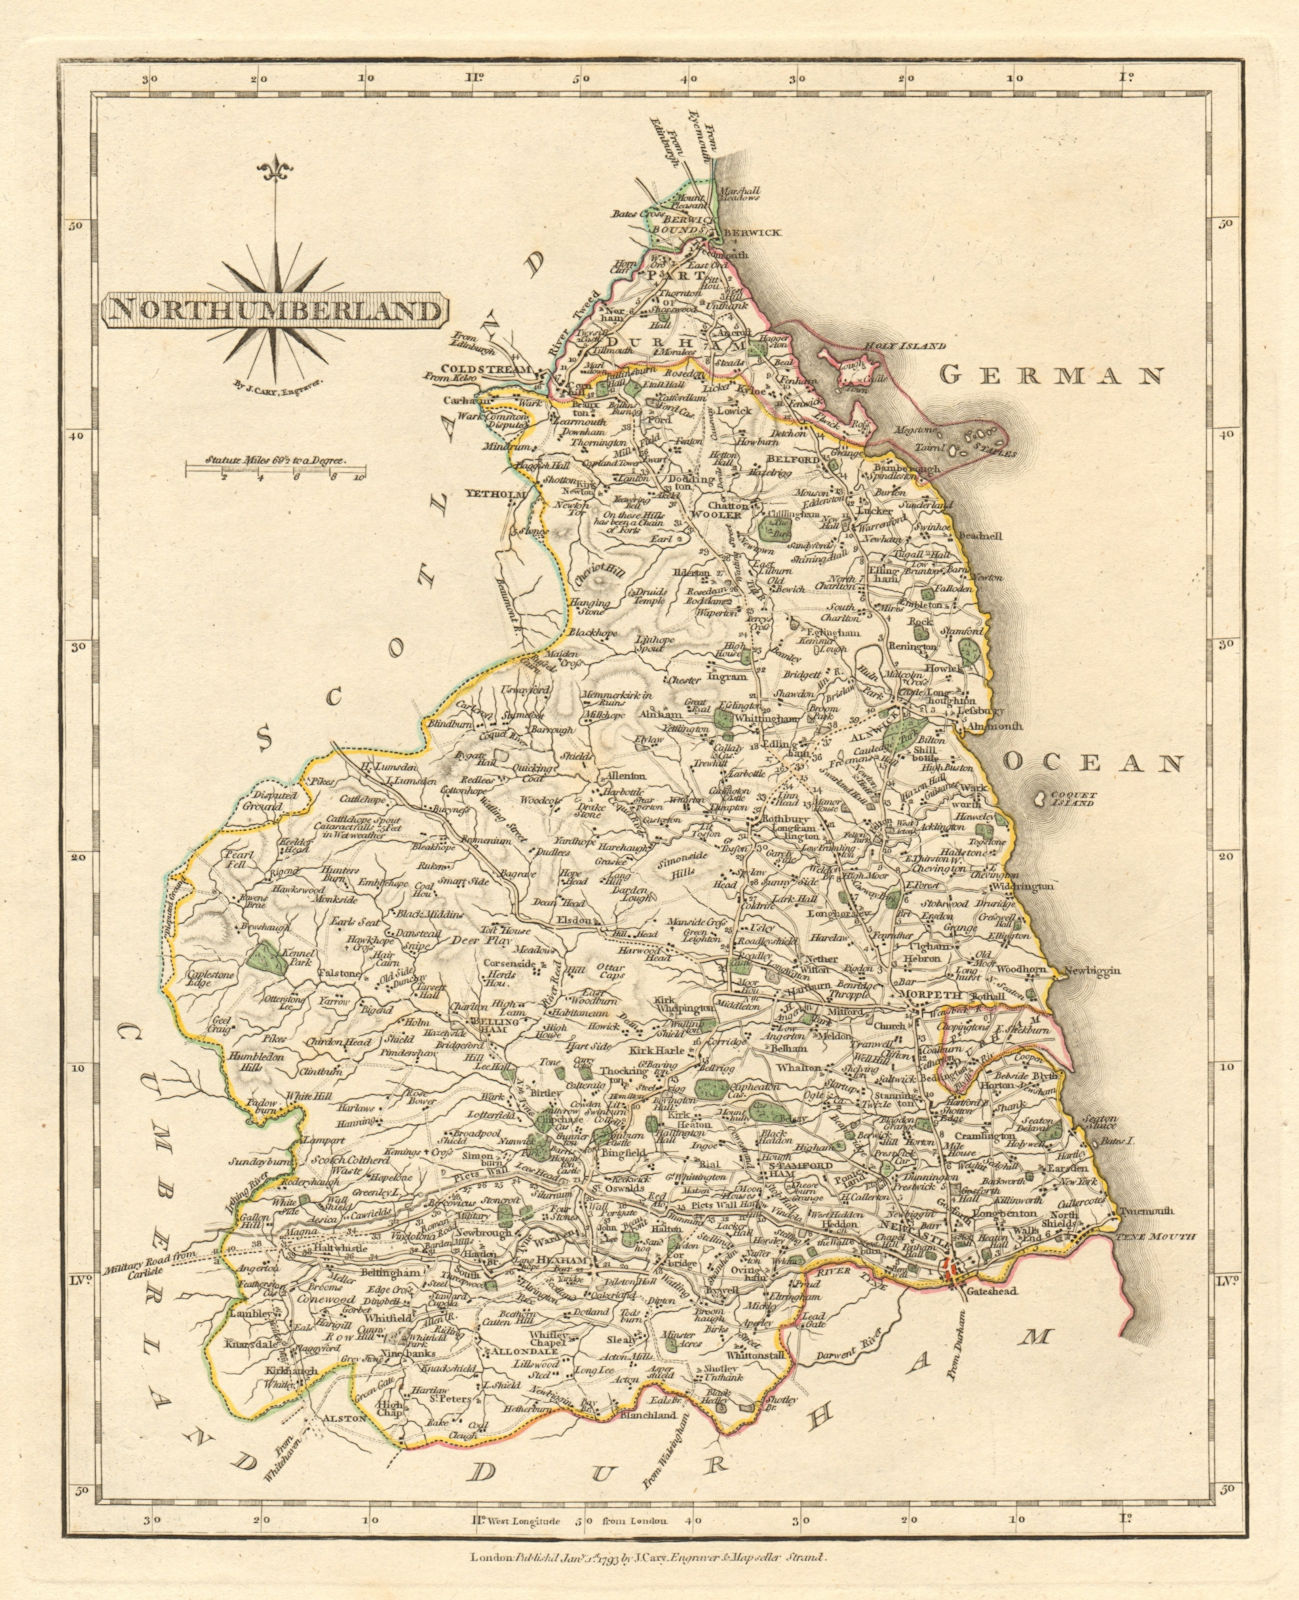 Antique county map of NORTHUMBERLAND by JOHN CARY. Original outline colour 1793